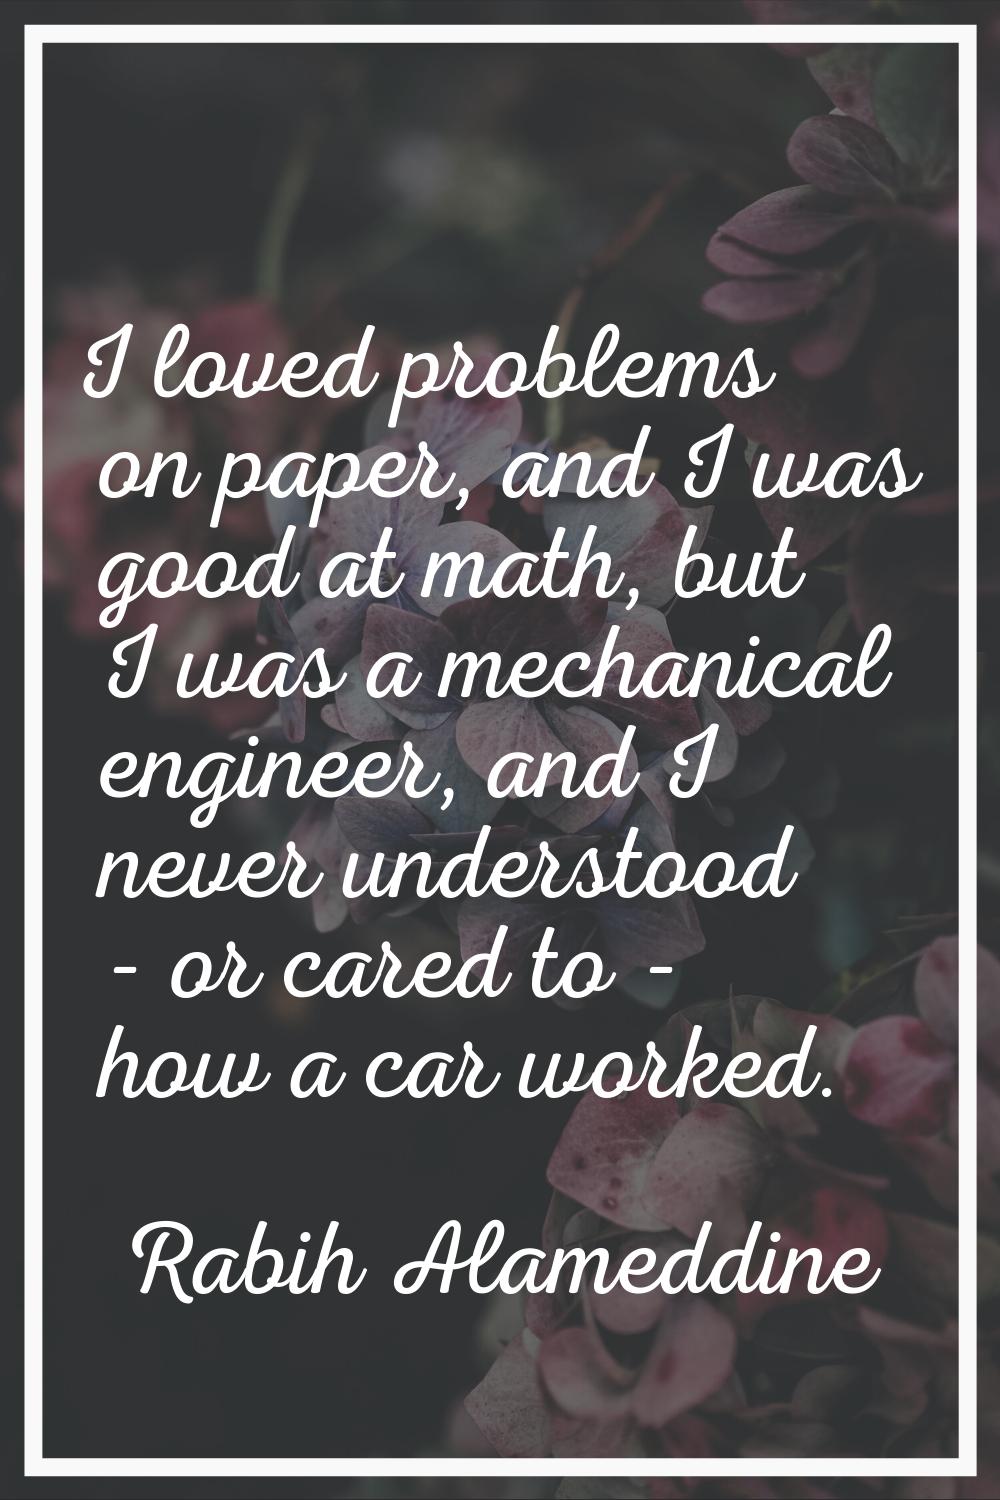 I loved problems on paper, and I was good at math, but I was a mechanical engineer, and I never und